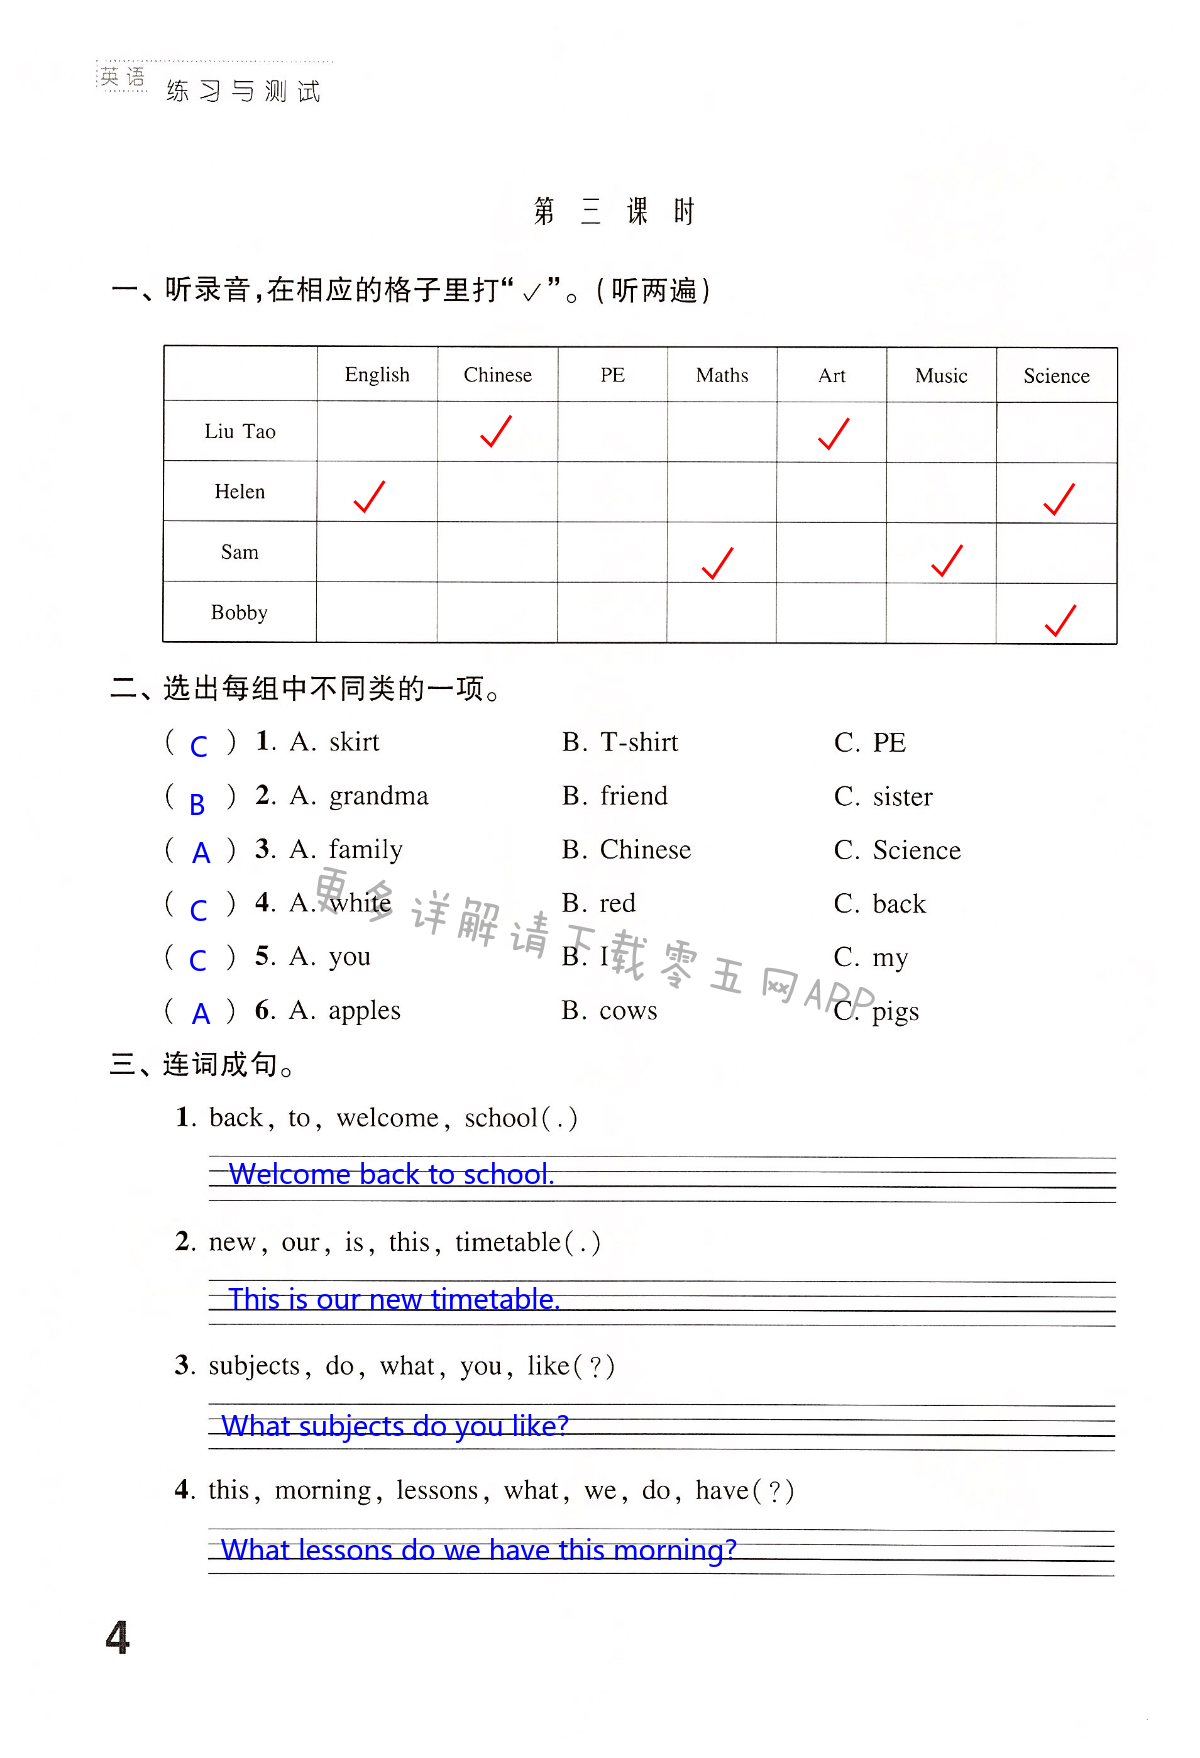 Unit 1 Our school subjects - 第4页